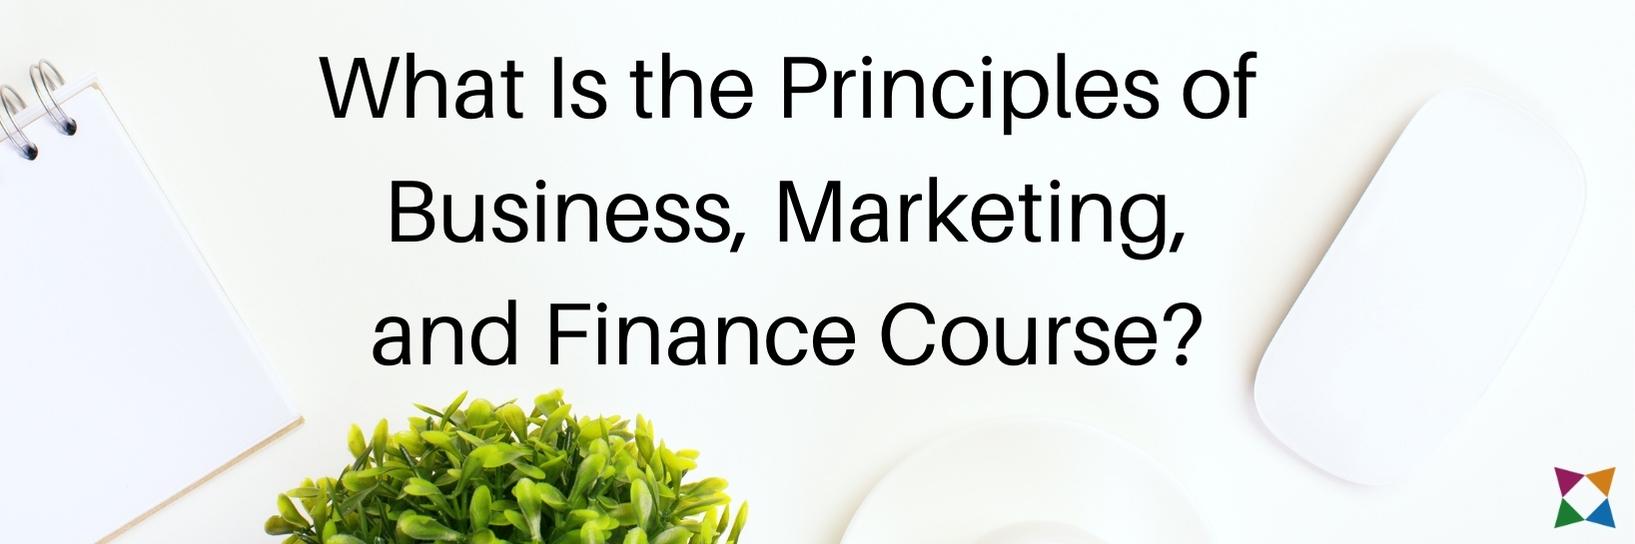 what-is-principles-business-marketing-finance